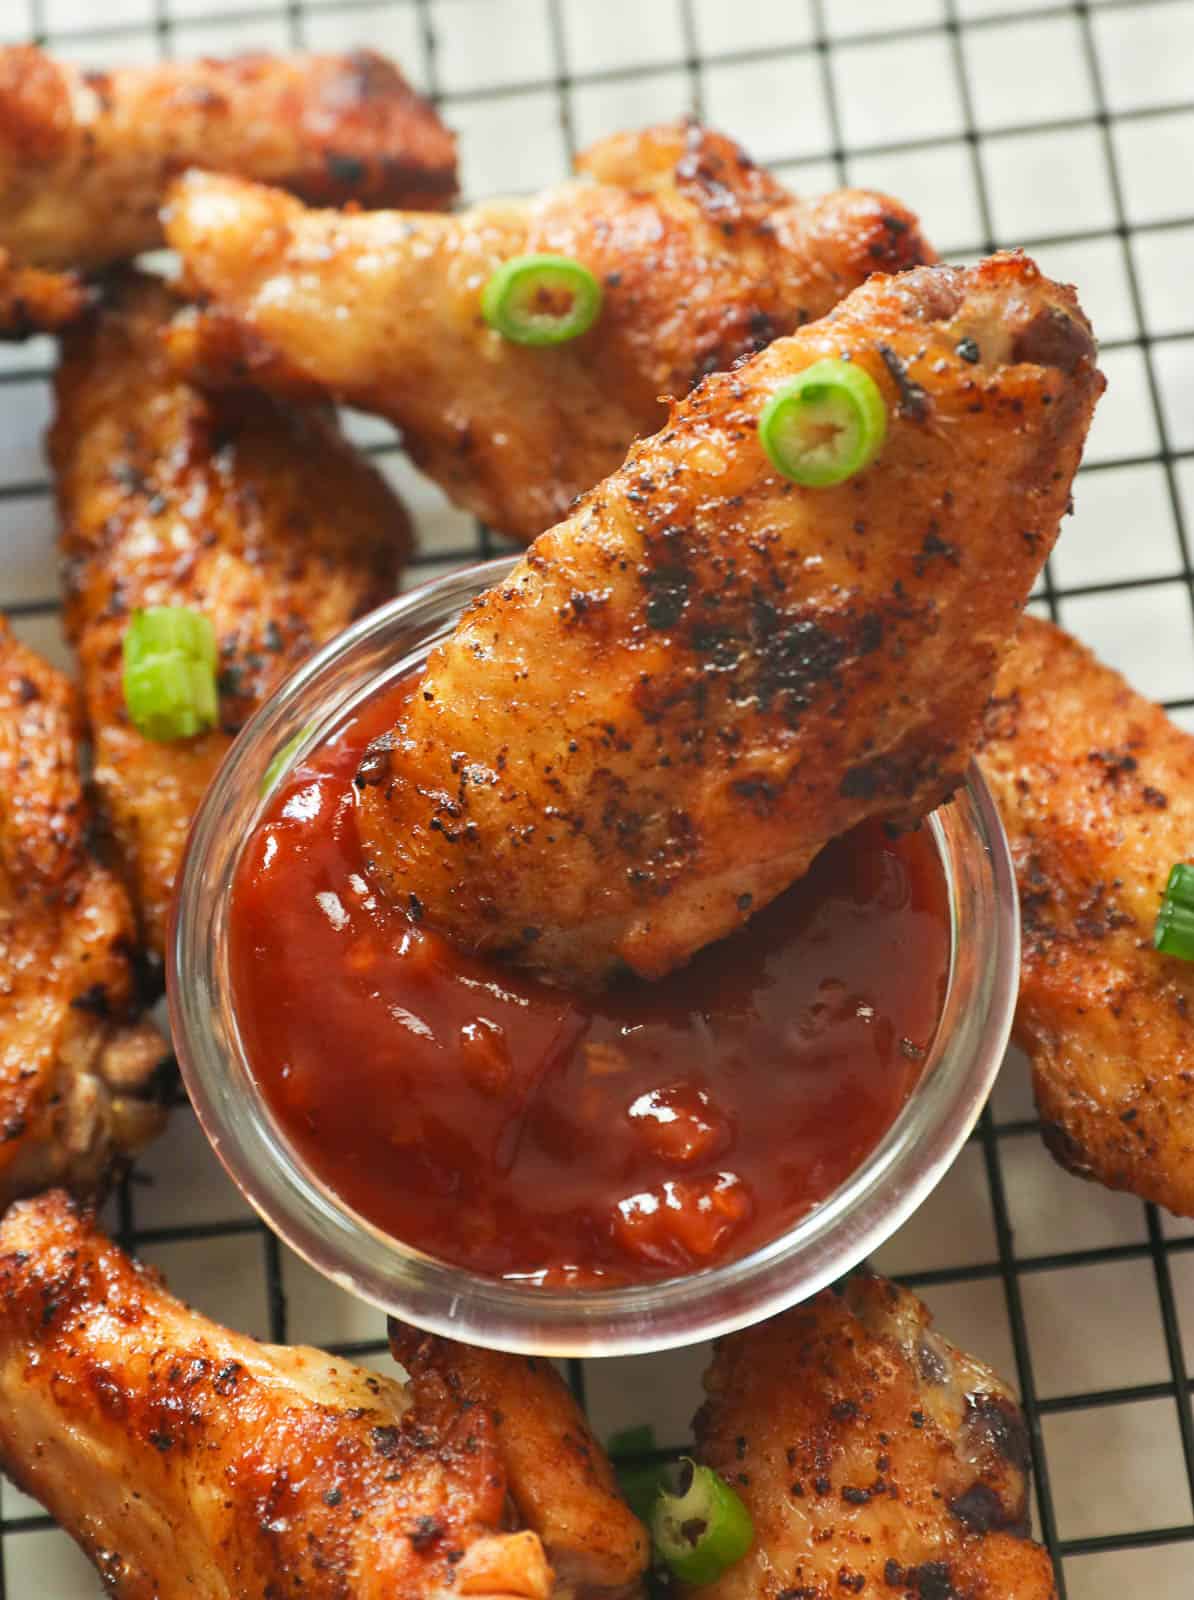 Dipping crispy grilled chicken wings in red sauce